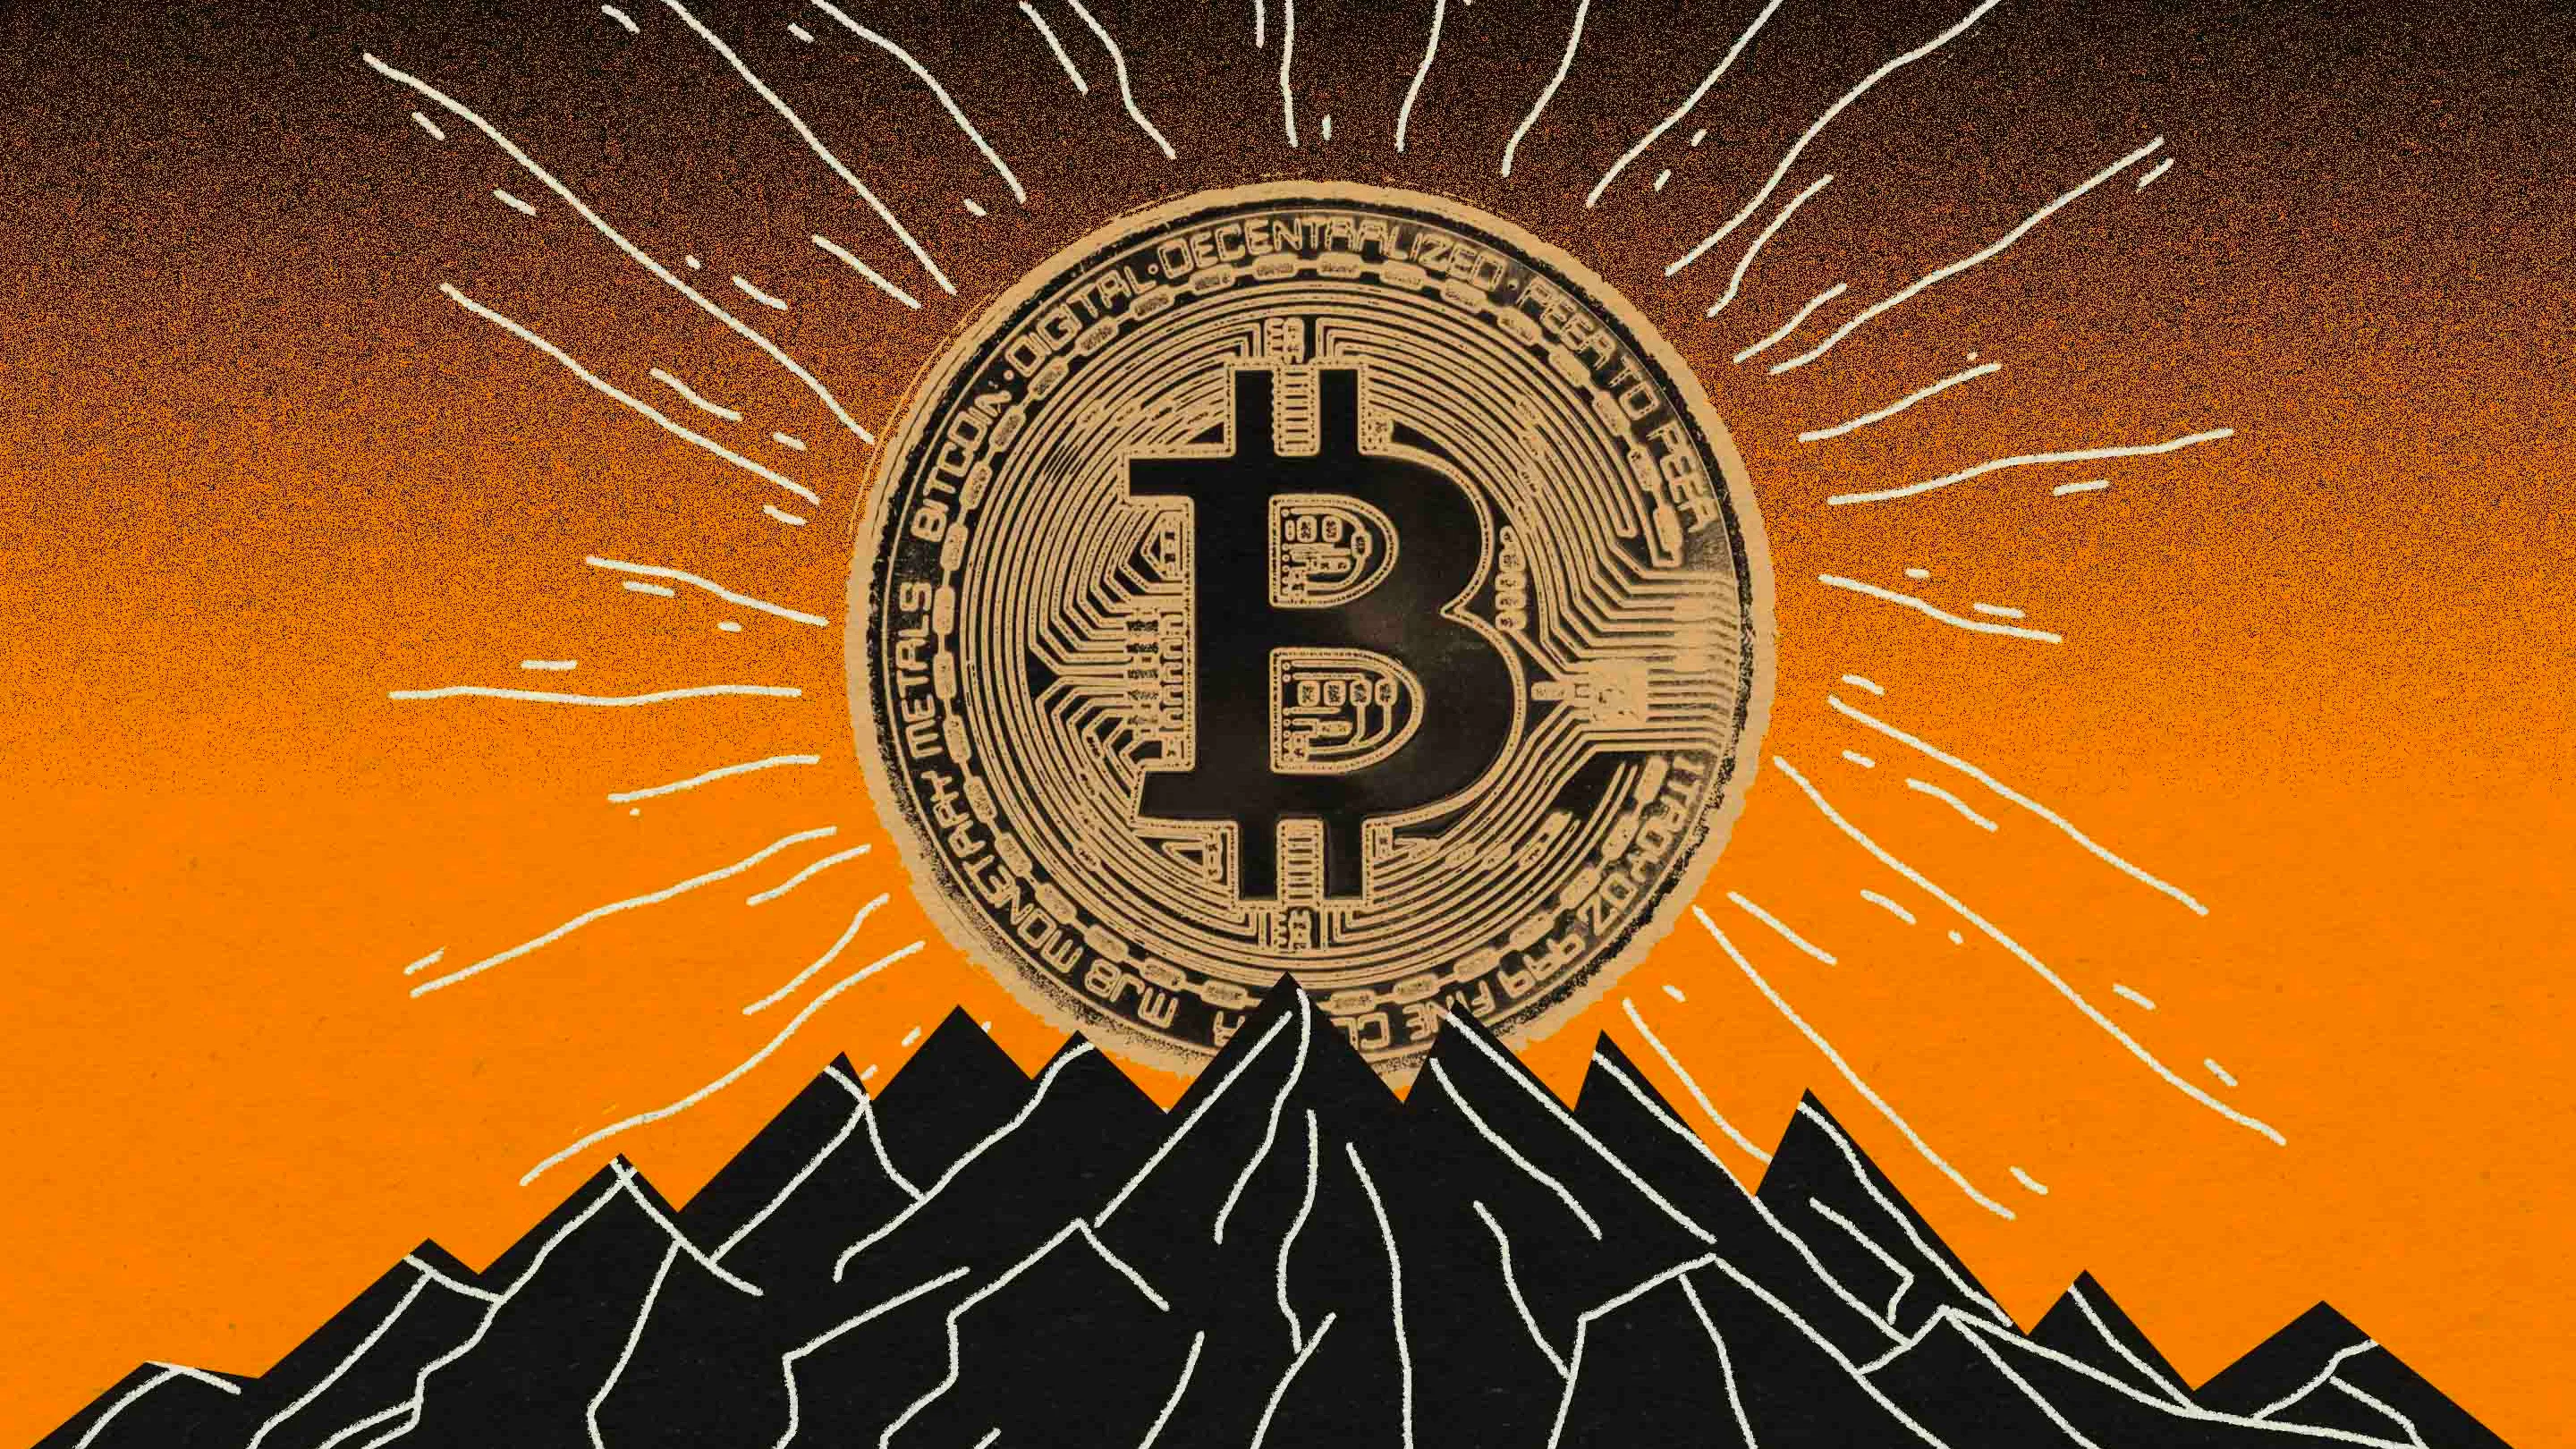 Bitcoin rises above $69, in new record high | Technology | The Guardian